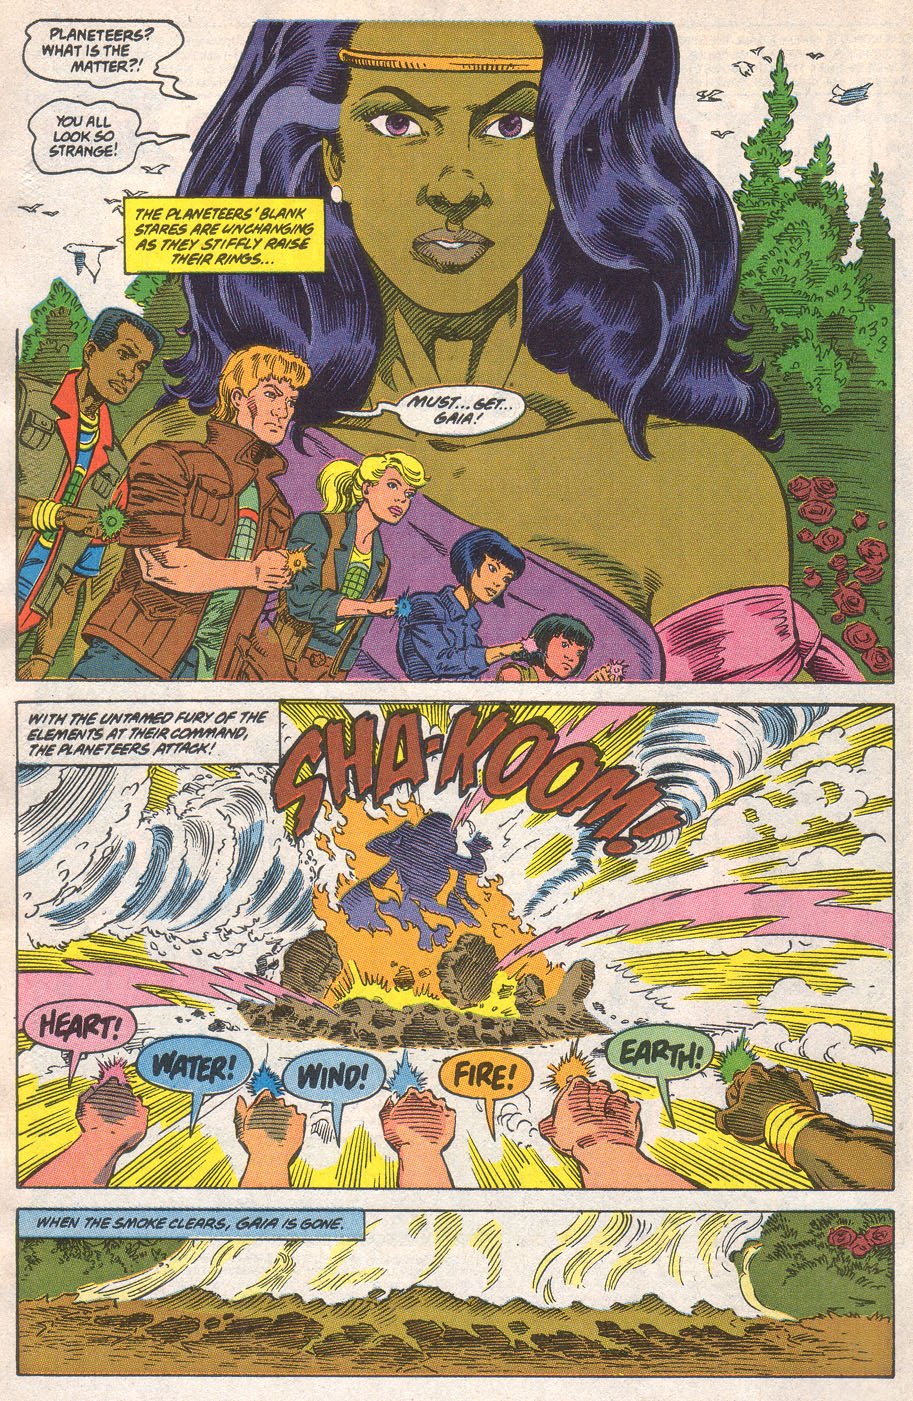 Captain Planet And The Planeteers Issue 7 | Read Captain Planet And The  Planeteers Issue 7 comic online in high quality. Read Full Comic online for  free - Read comics online in